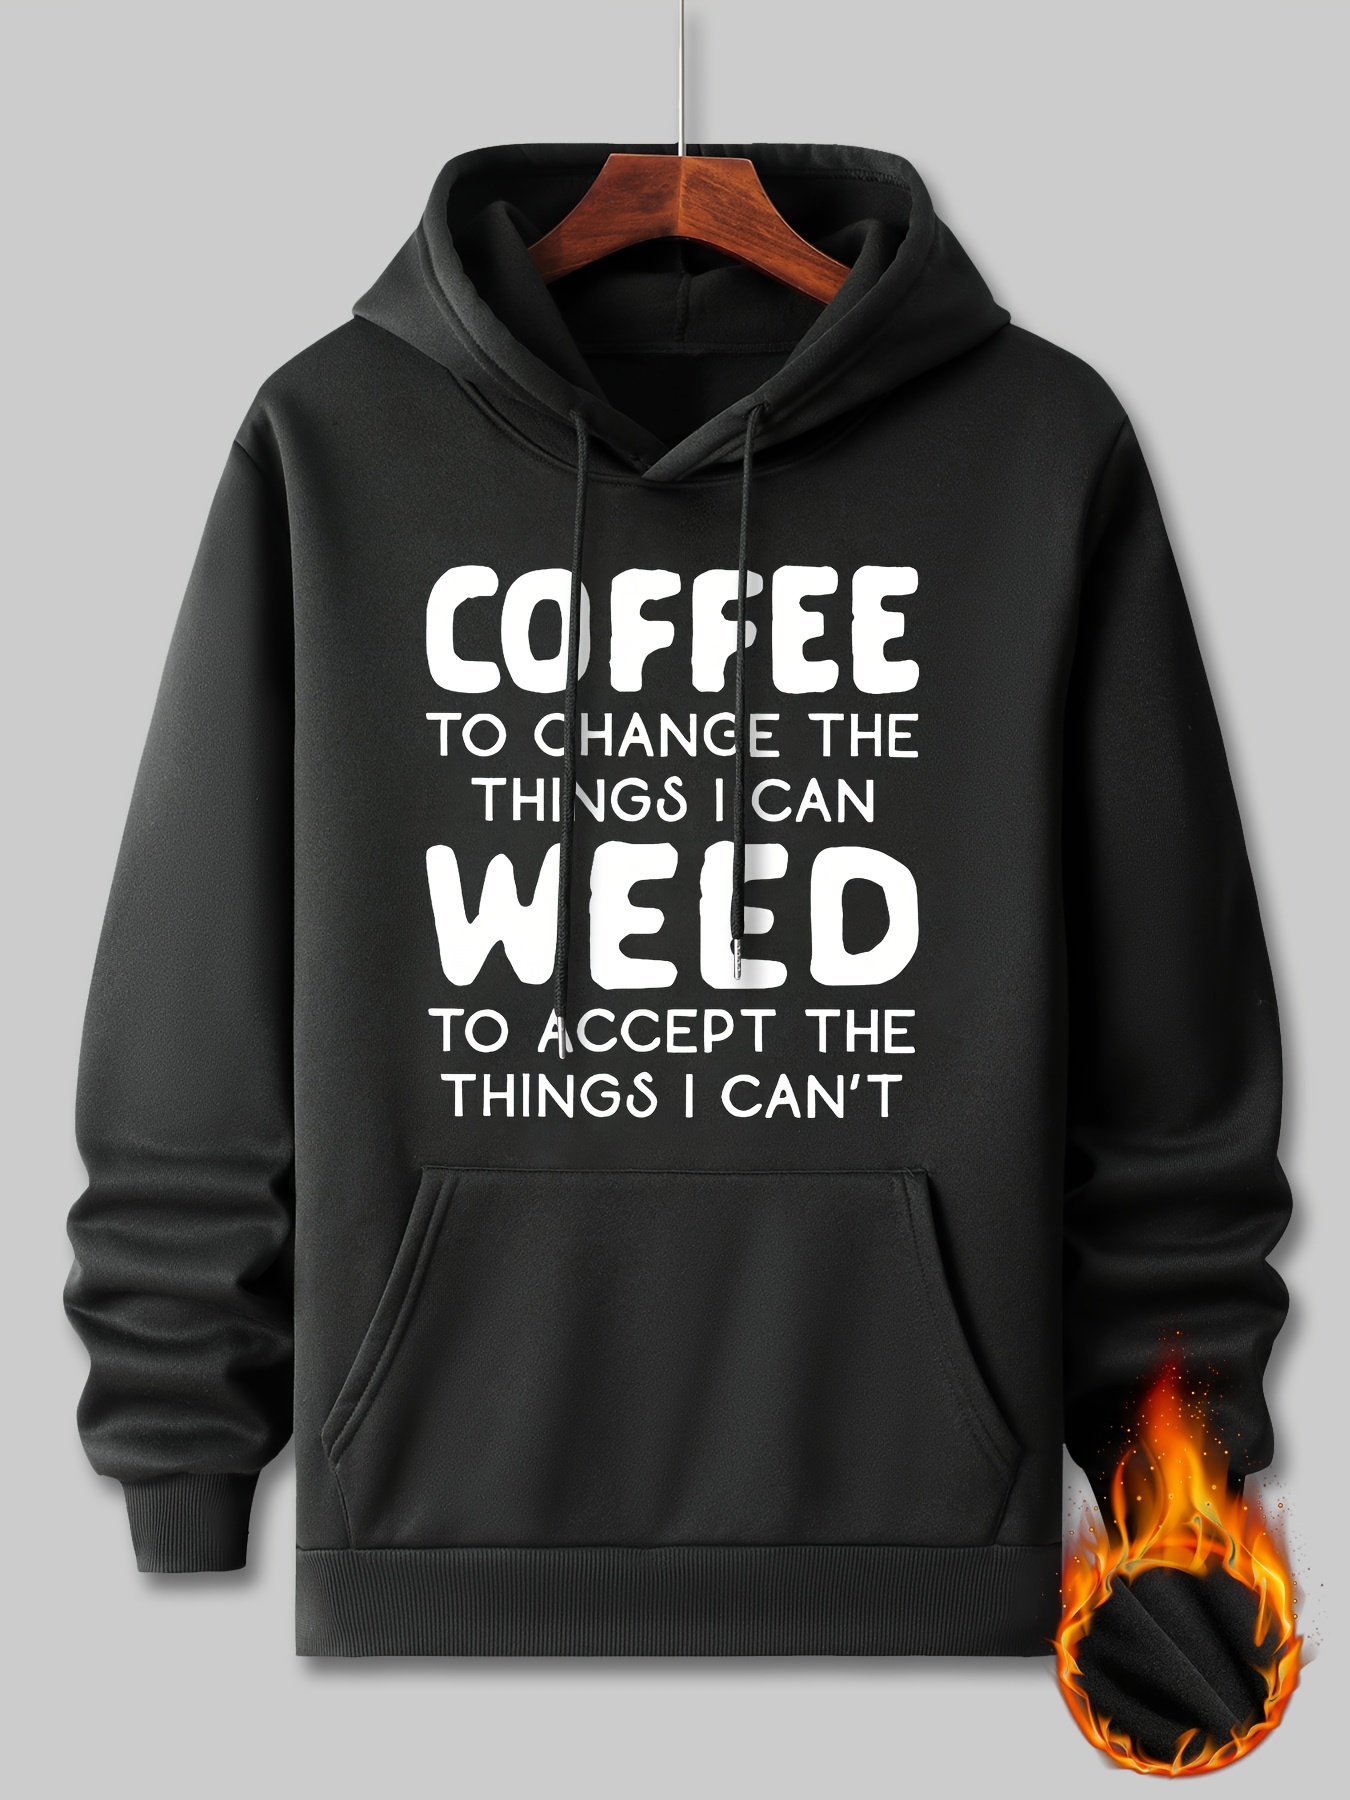 coffee and weed pattern print hooded sweatshirt personalized hoodies fashion casual tops for spring autumn mens clothing details 10